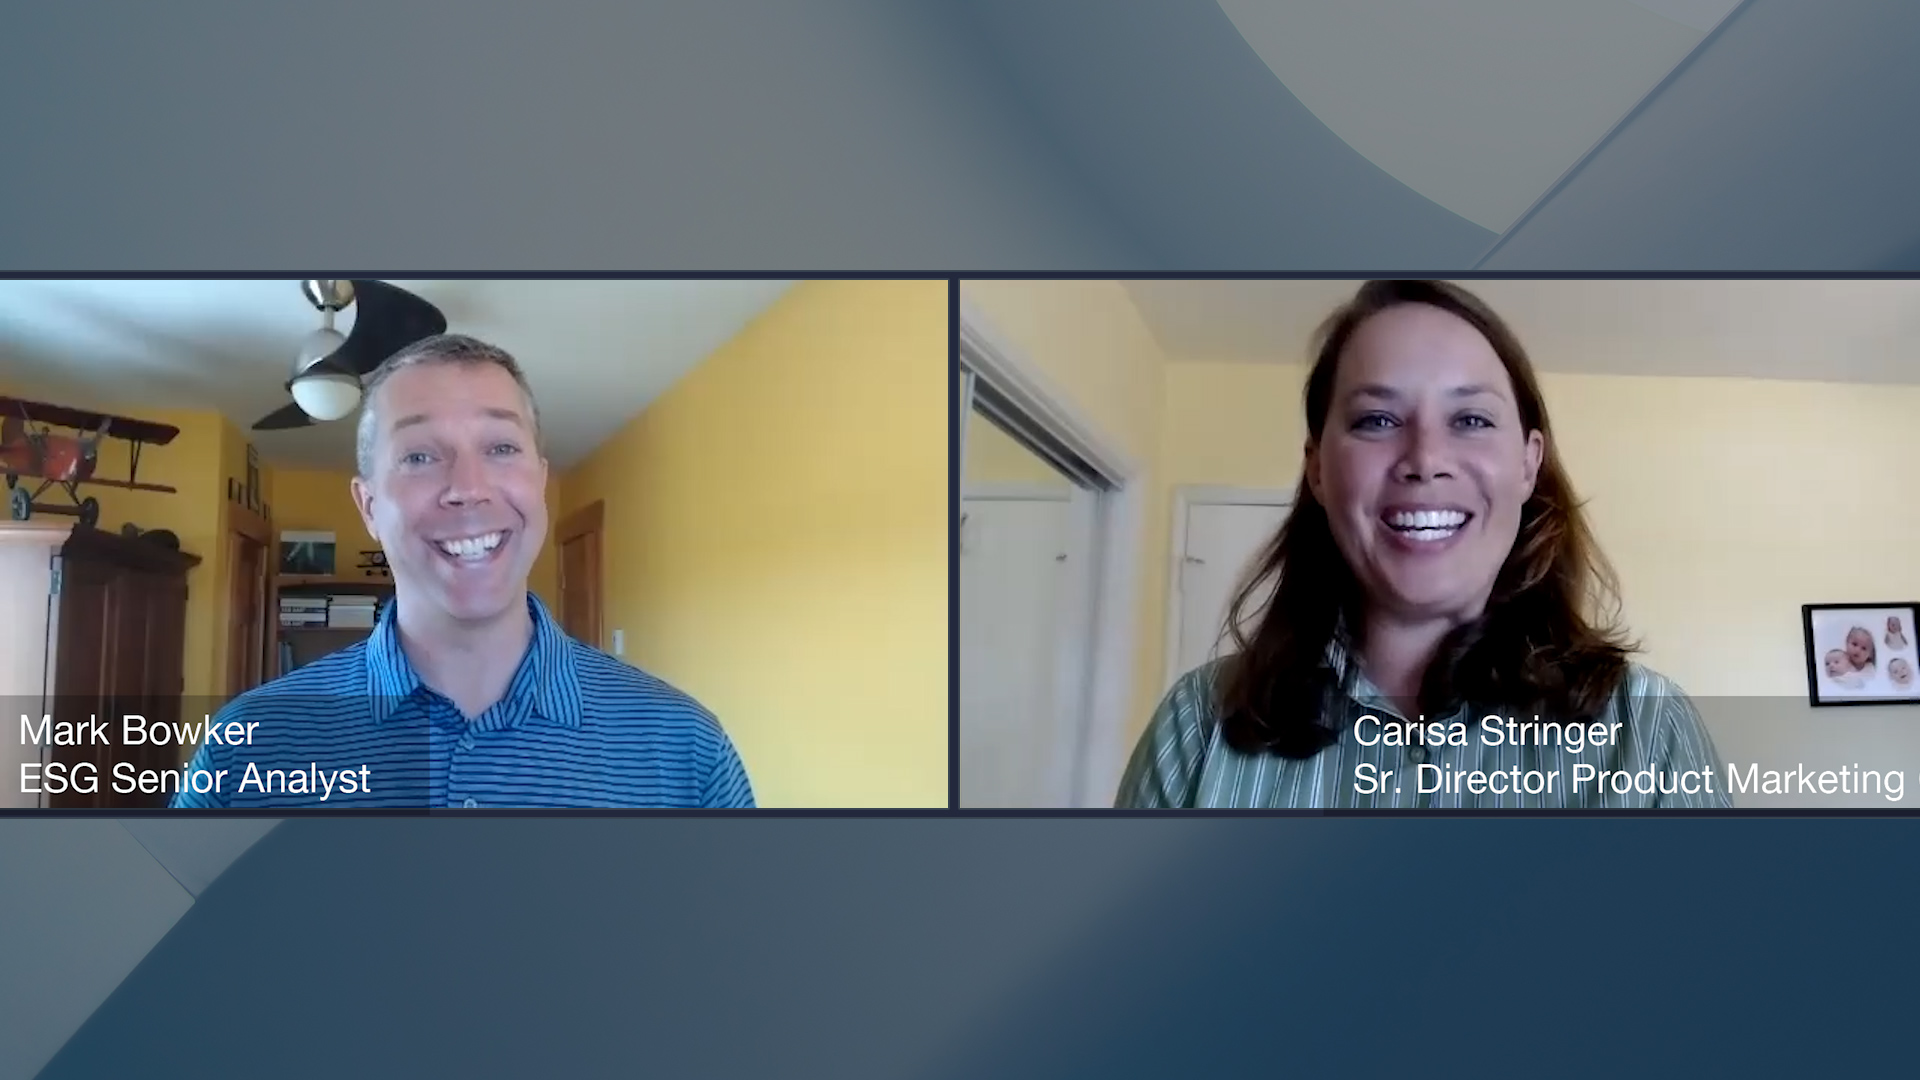 User Productivity Video with Carisa Stringer, Senior Director, Product Marketing at Citrix